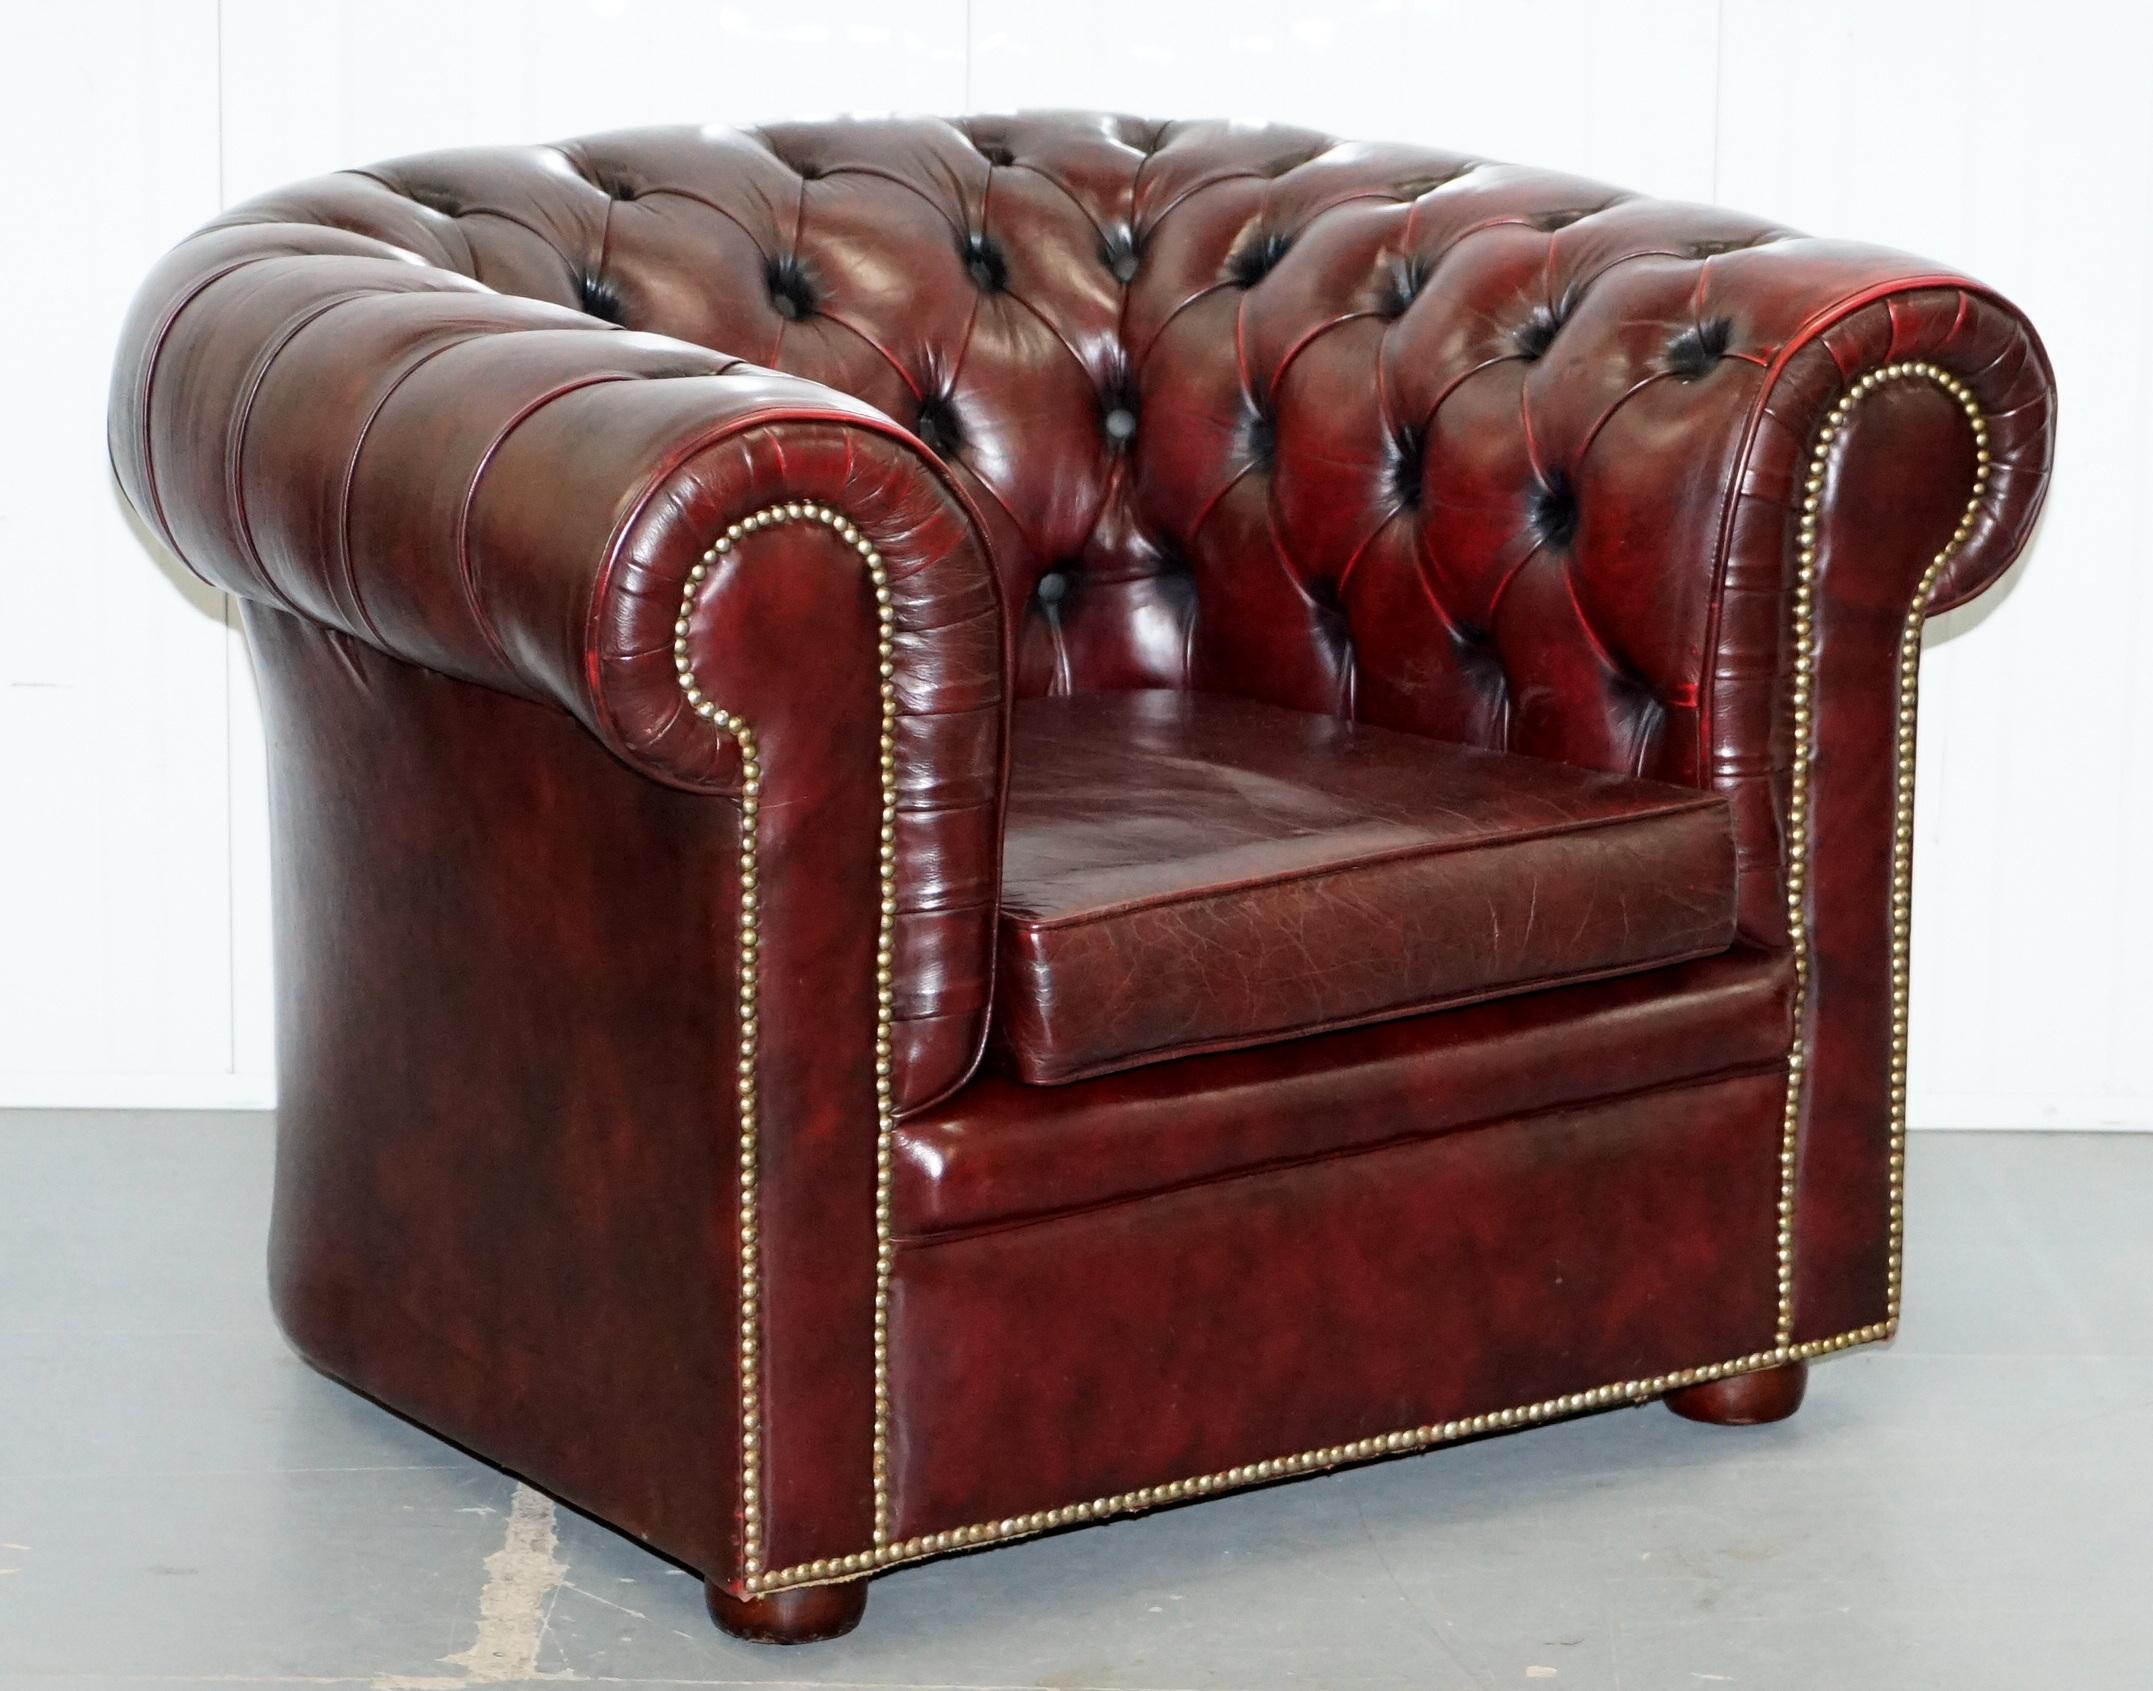 We are delighted to offer this lovely pair of vintage hand made in England Chesterfield Oxblood leather club armchairs

There are hundreds of different models of this type of chair around, the quality is in the detail, these are upholstered with